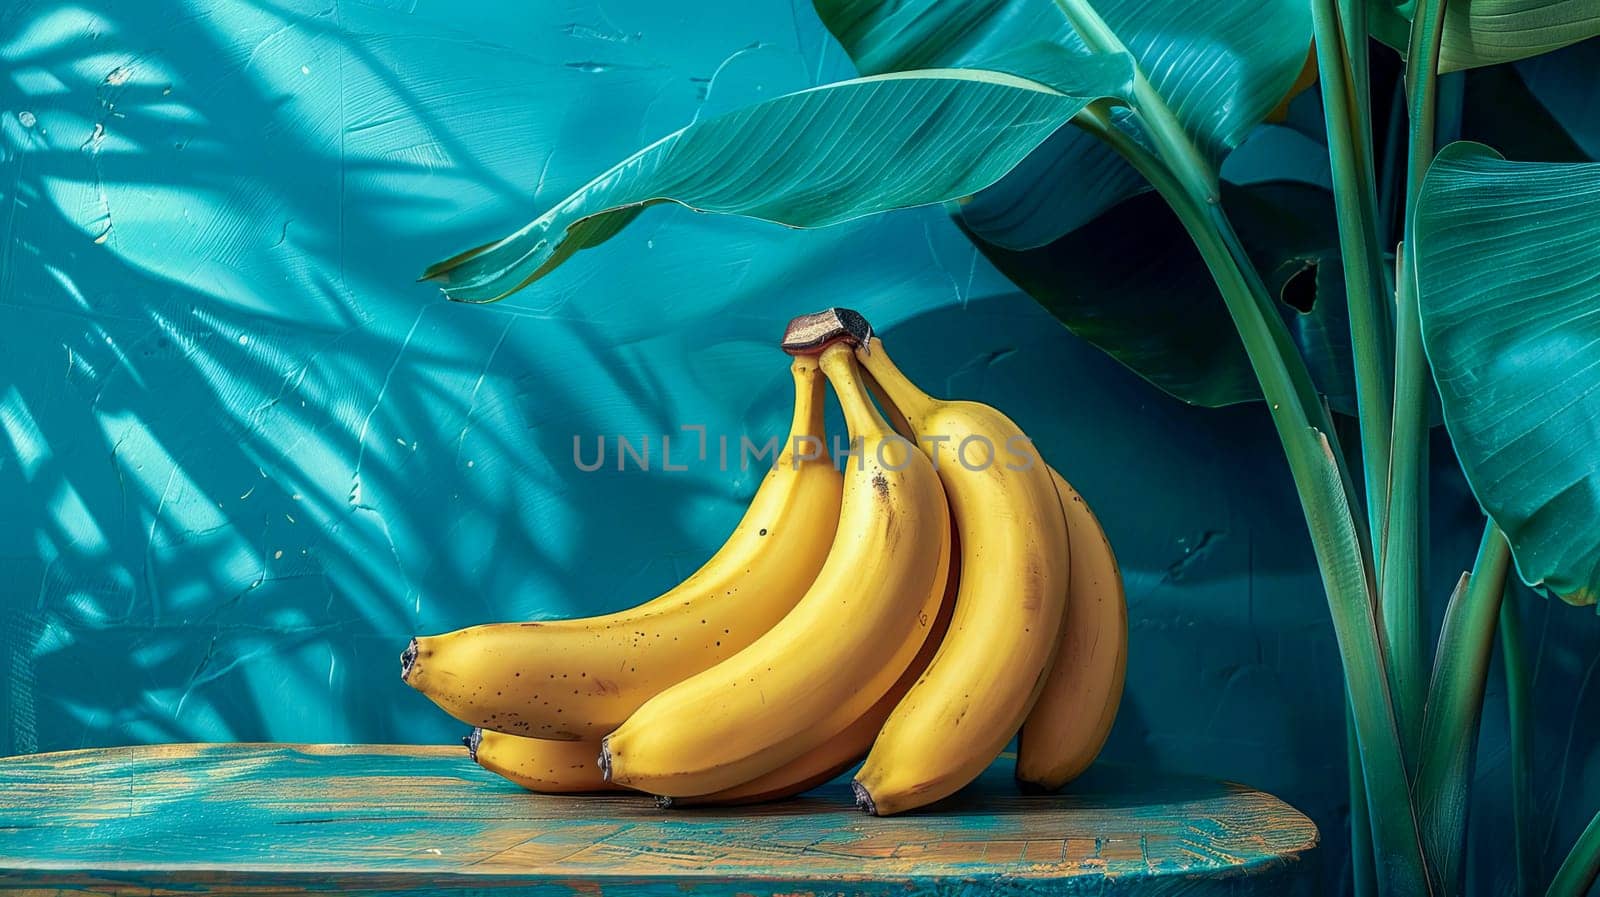 Ripe bananas on a wooden surface, tropical background. by OlgaGubskaya